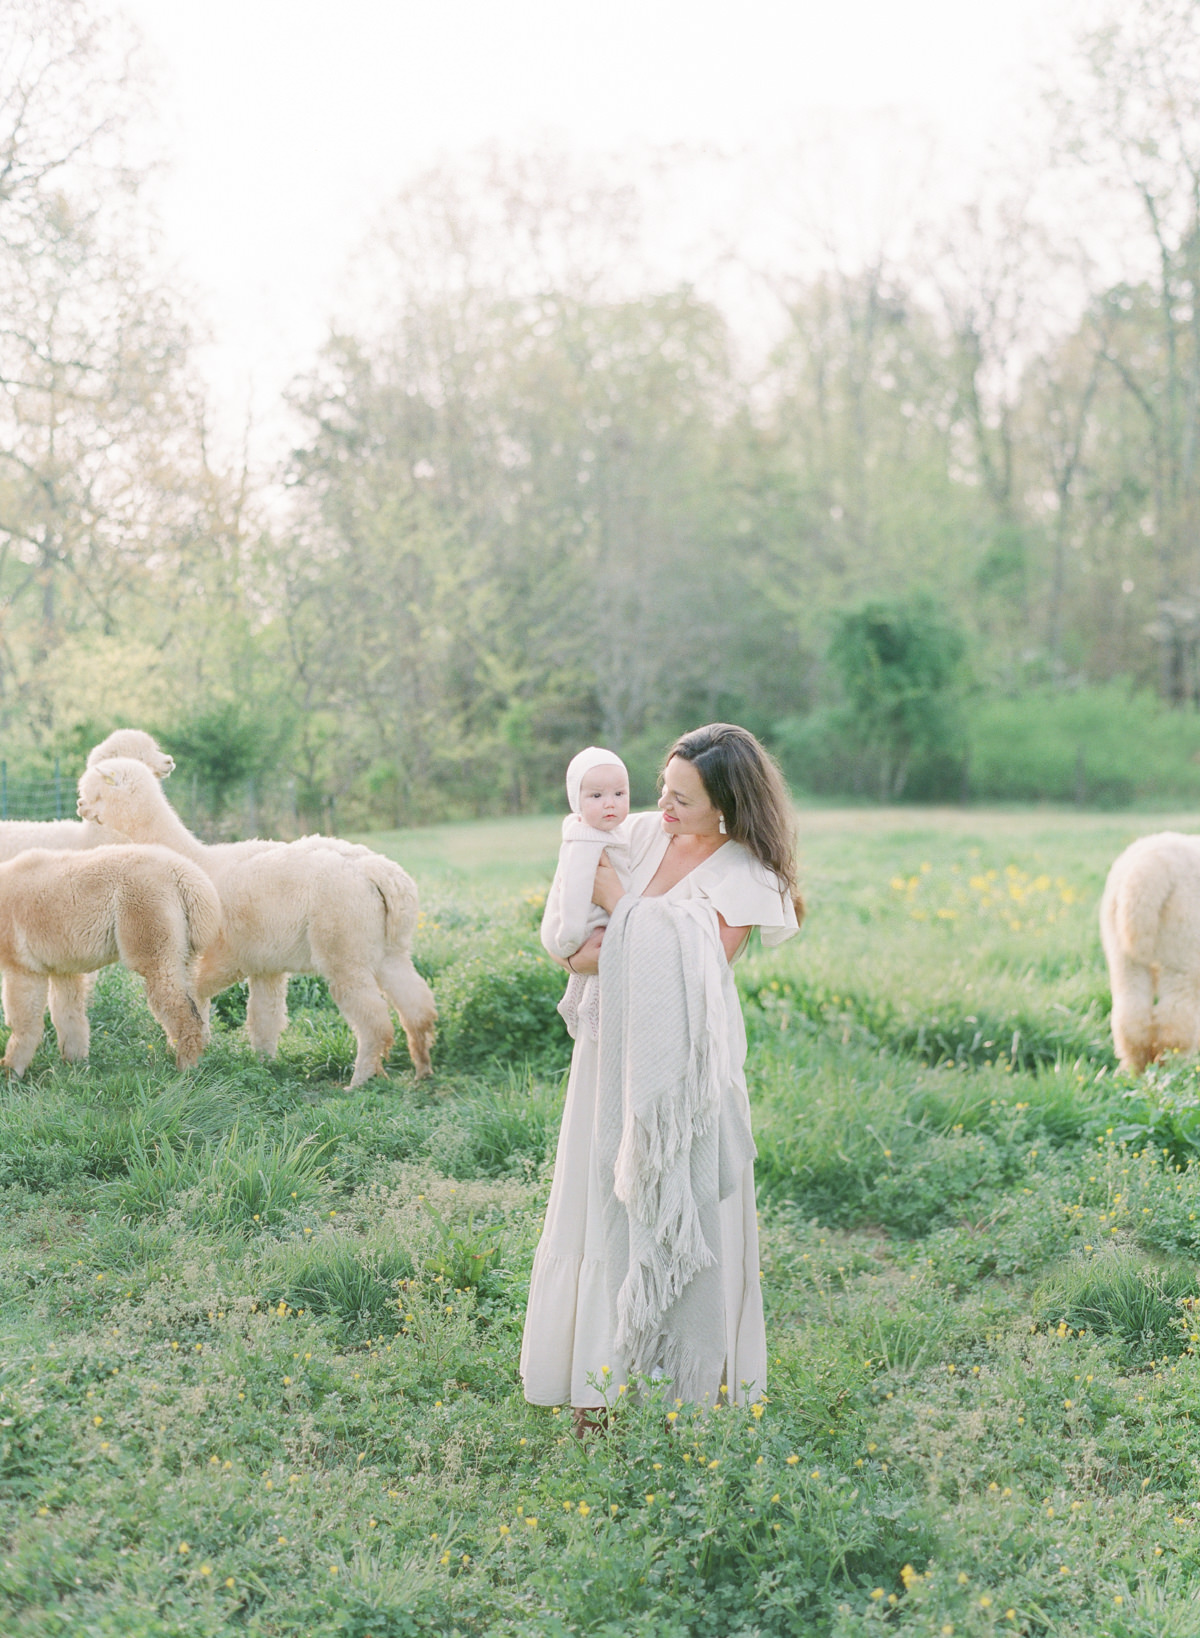 Kent-Avenue-Photography-Charlotte-Newborn-Photographers-On-Film-Mother-and-child-in-fiel-with-alpacas